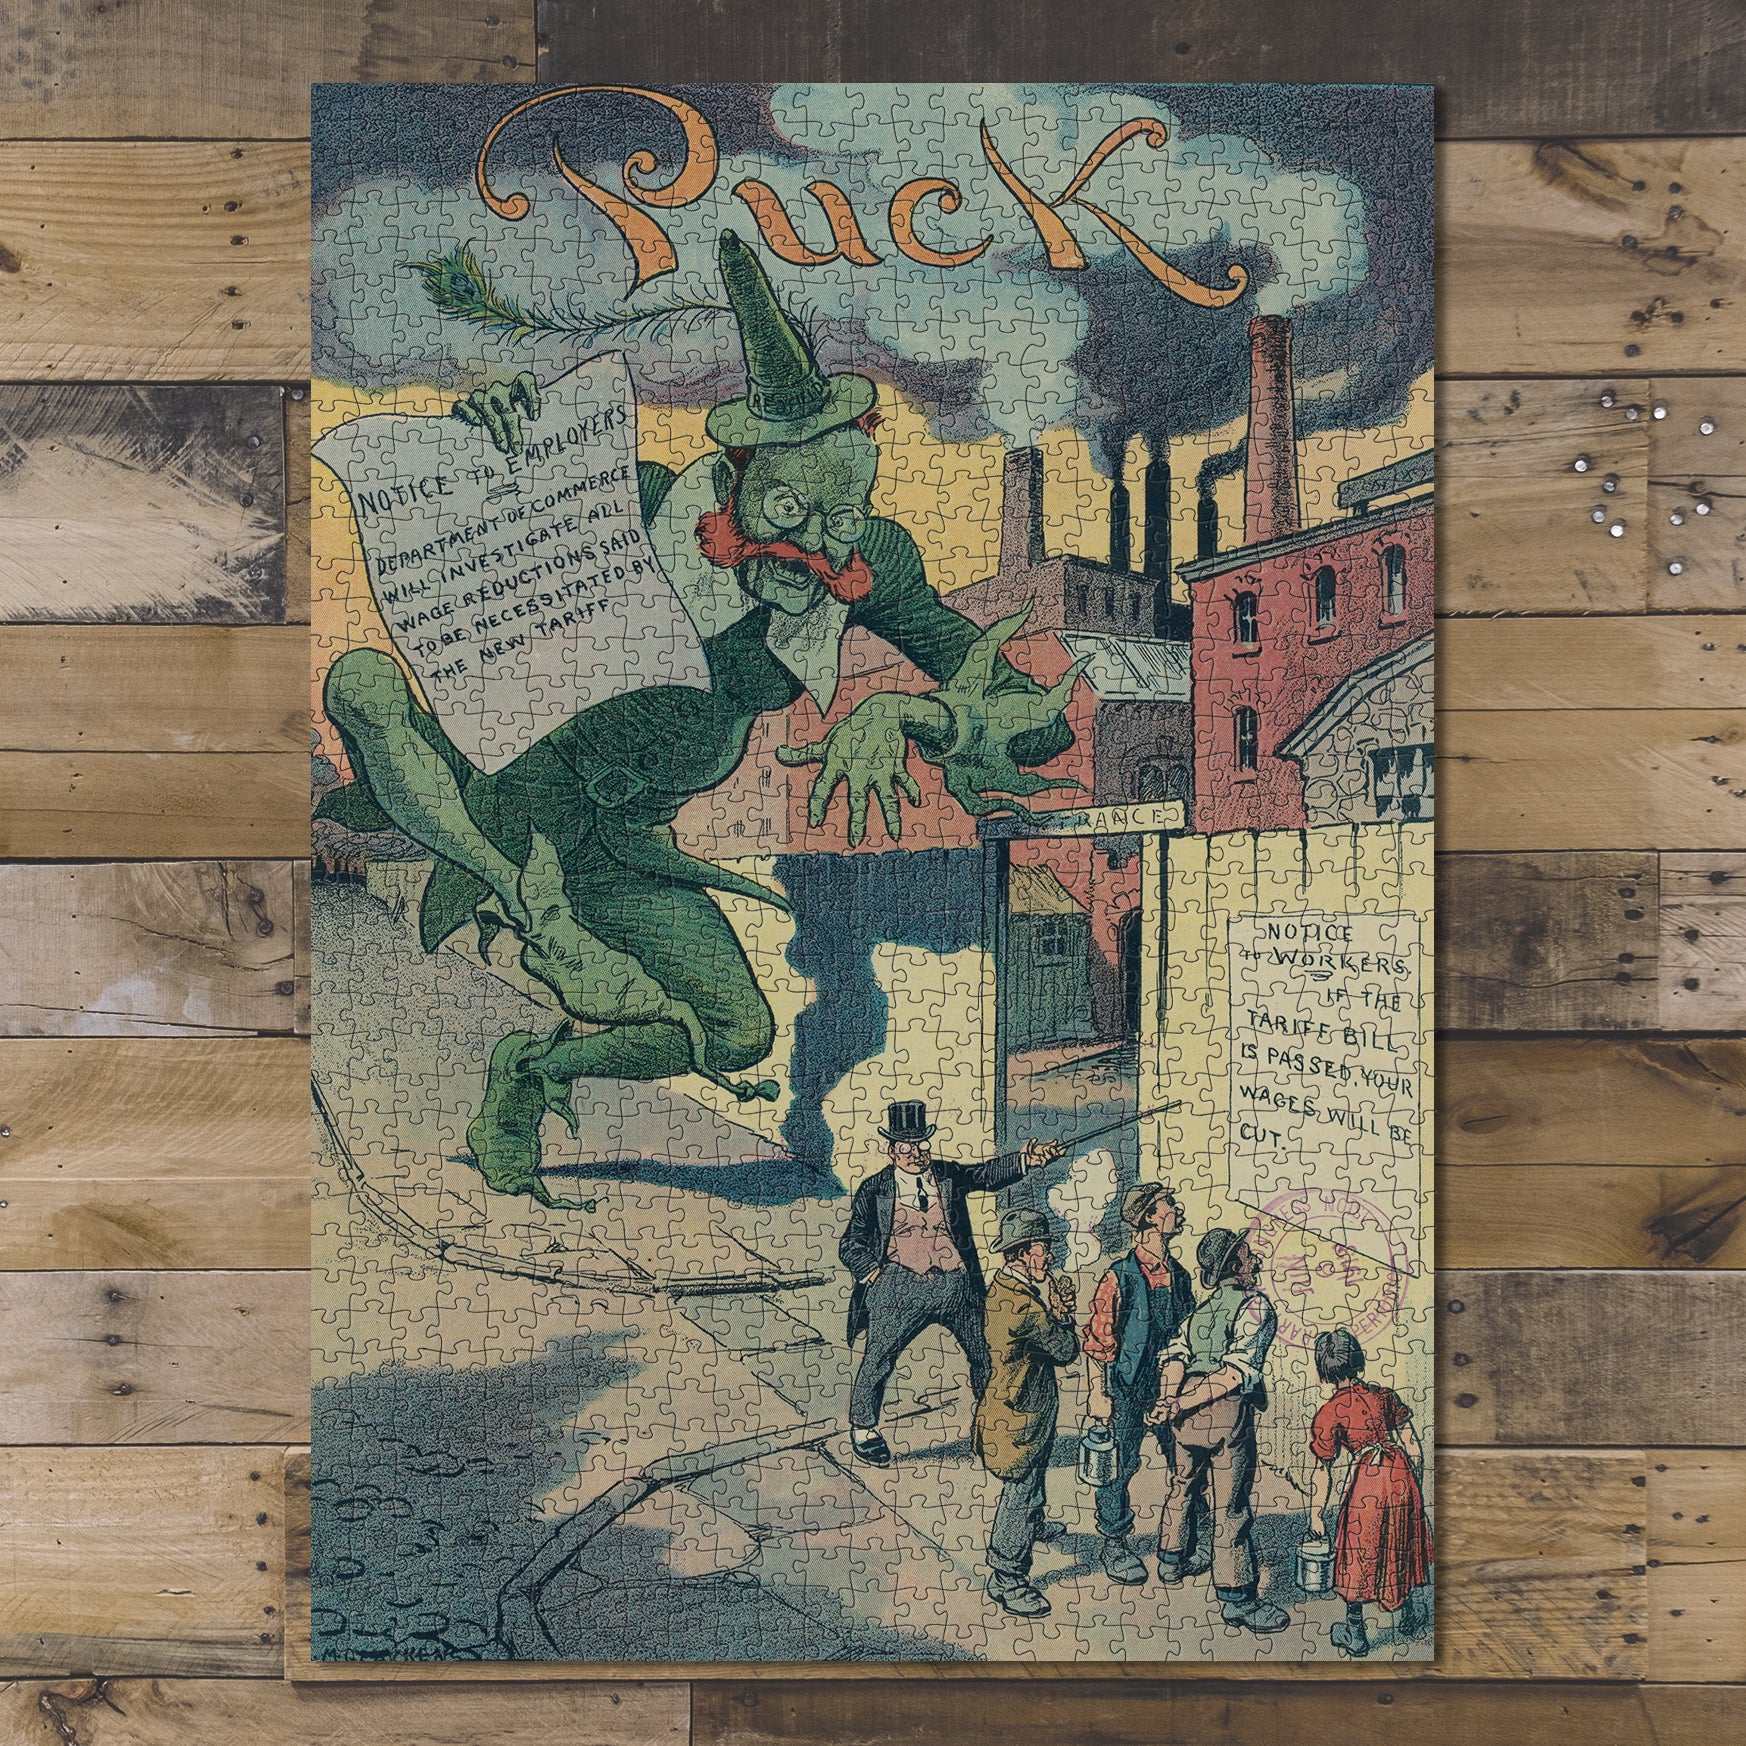 1000 piece puzzle 1913 Photo of Puck The Goblin will get you if you don't watch out! Glackens